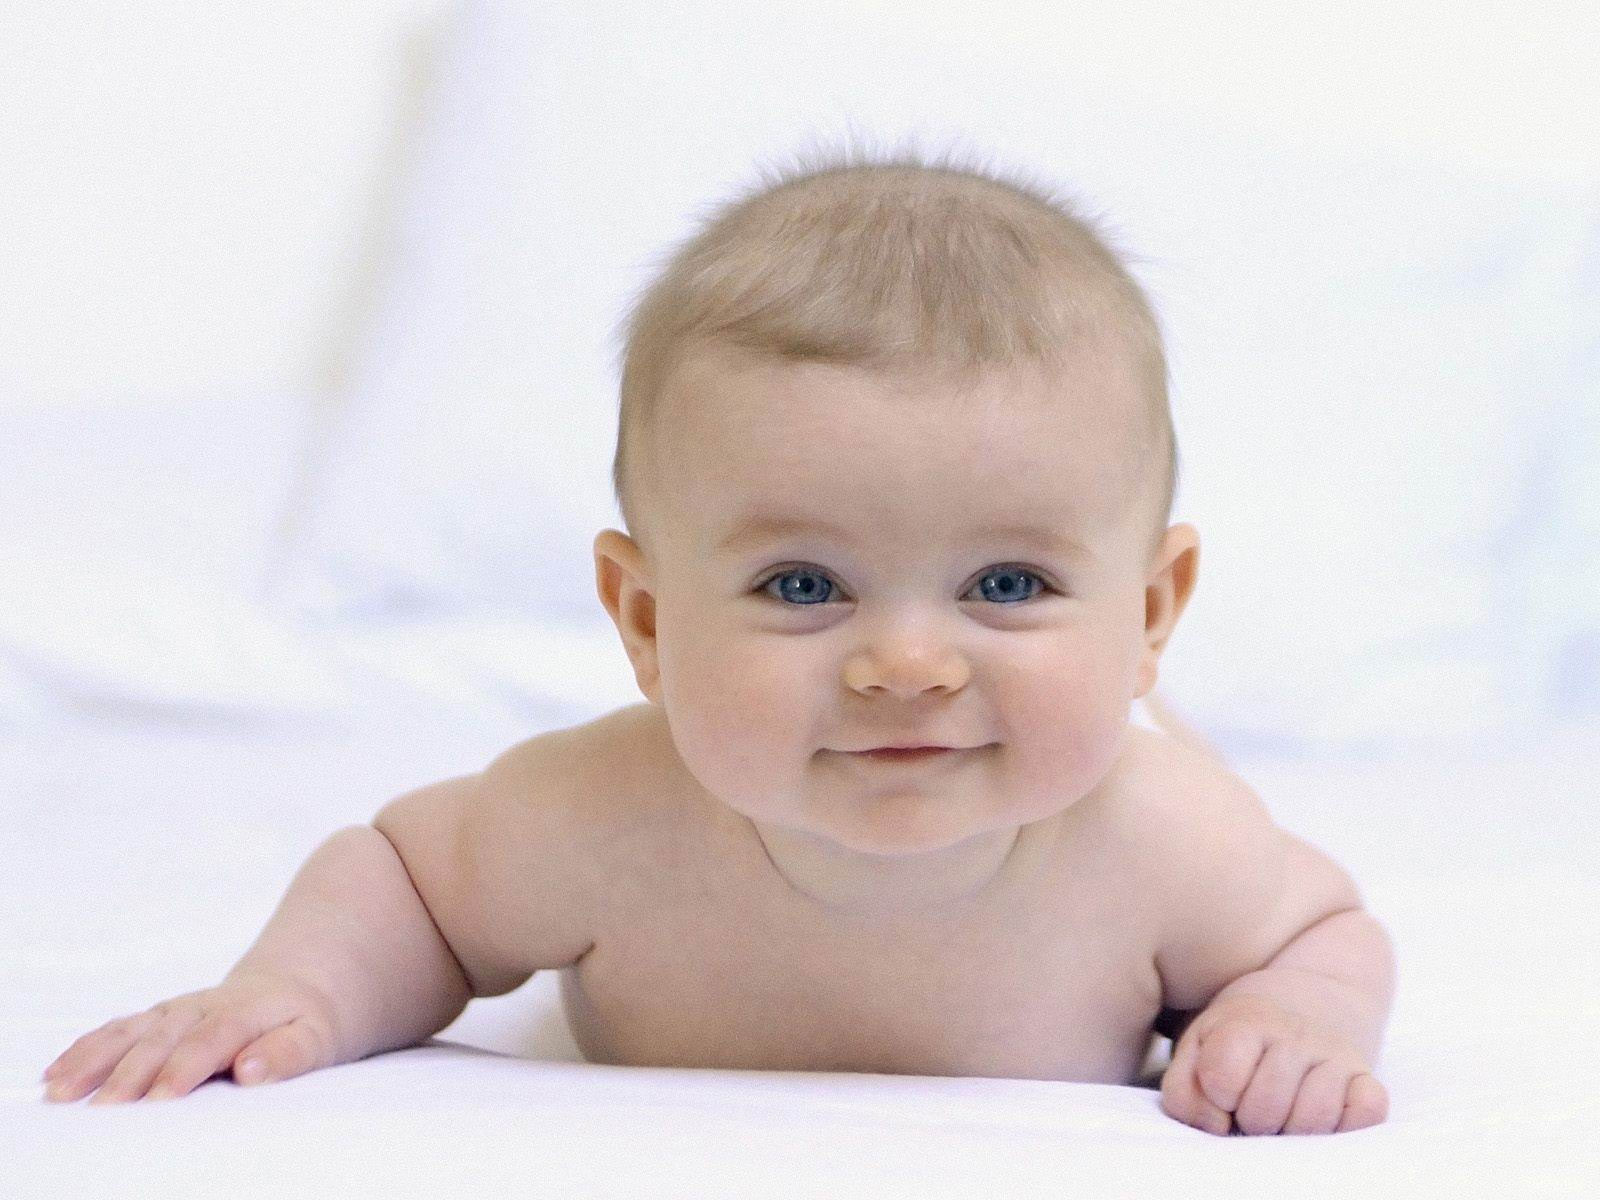 Babbies Wallpapers Free Download, Cute Kids Wallpapers, Smiling Crying ...